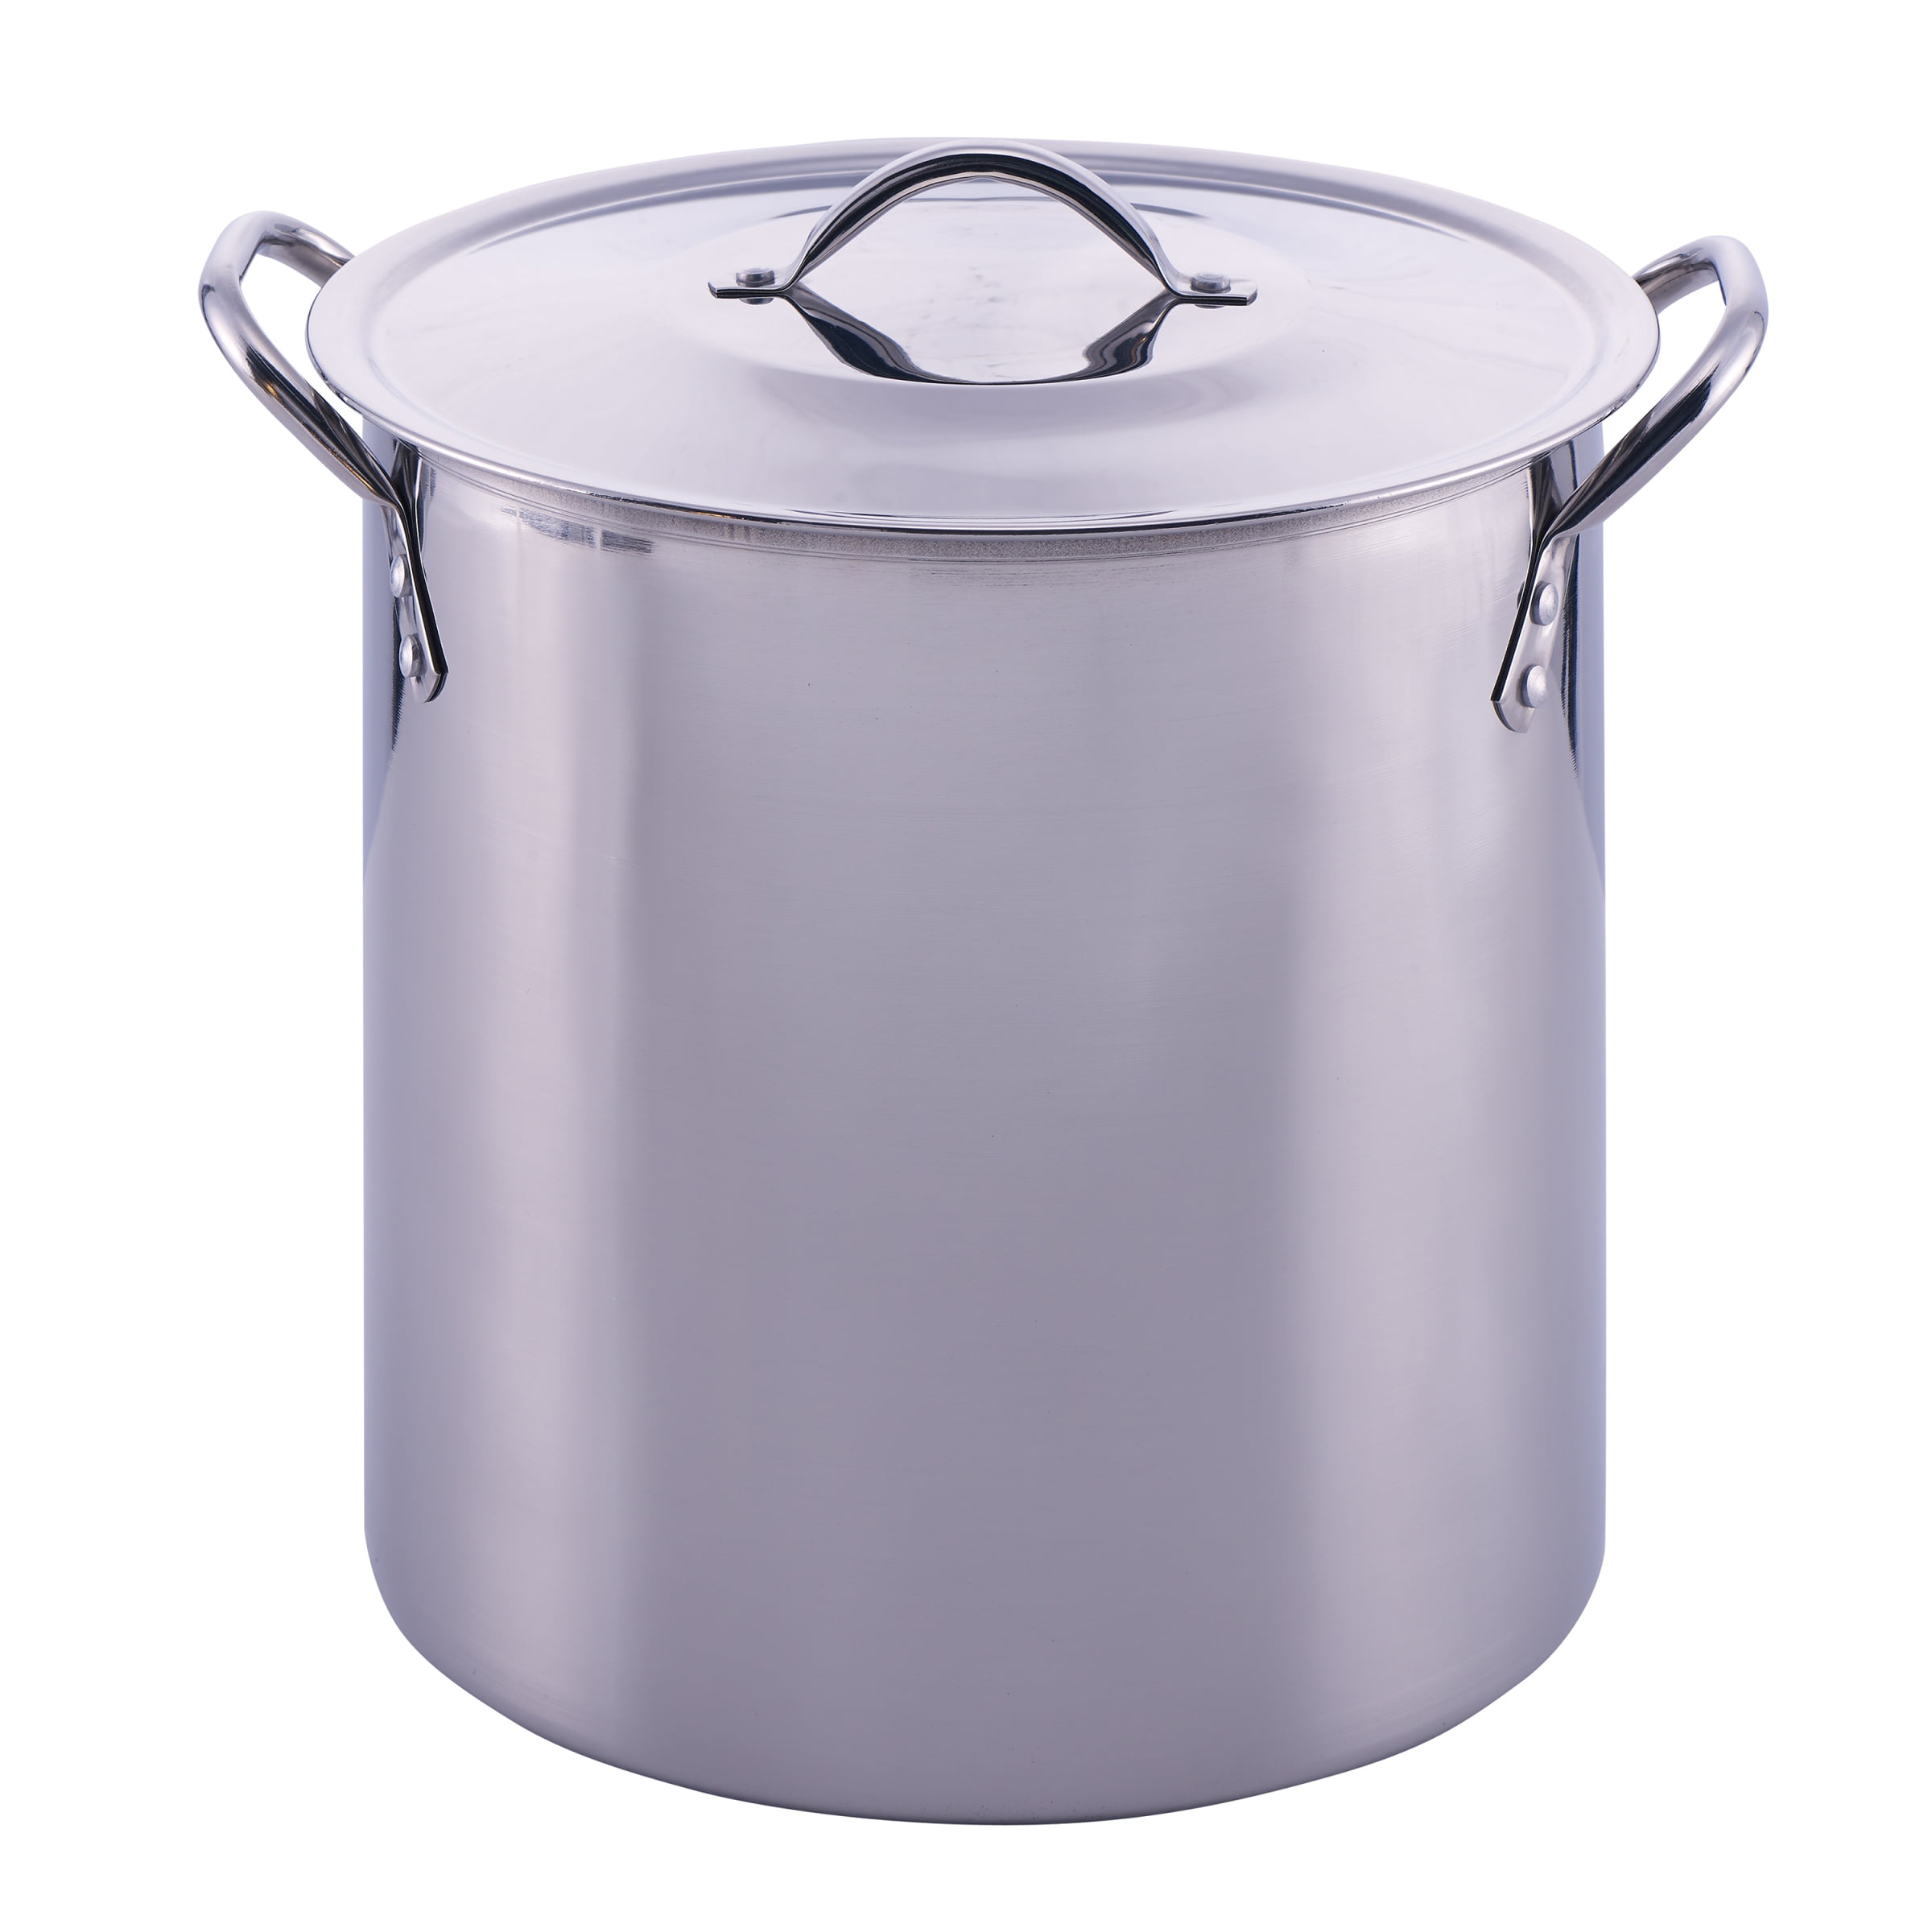 Mainstays 16 Quart Stock Pot with Lid, Stainless Steel - Walmart.com Mainstays Stainless Steel Stock Pot With Lid